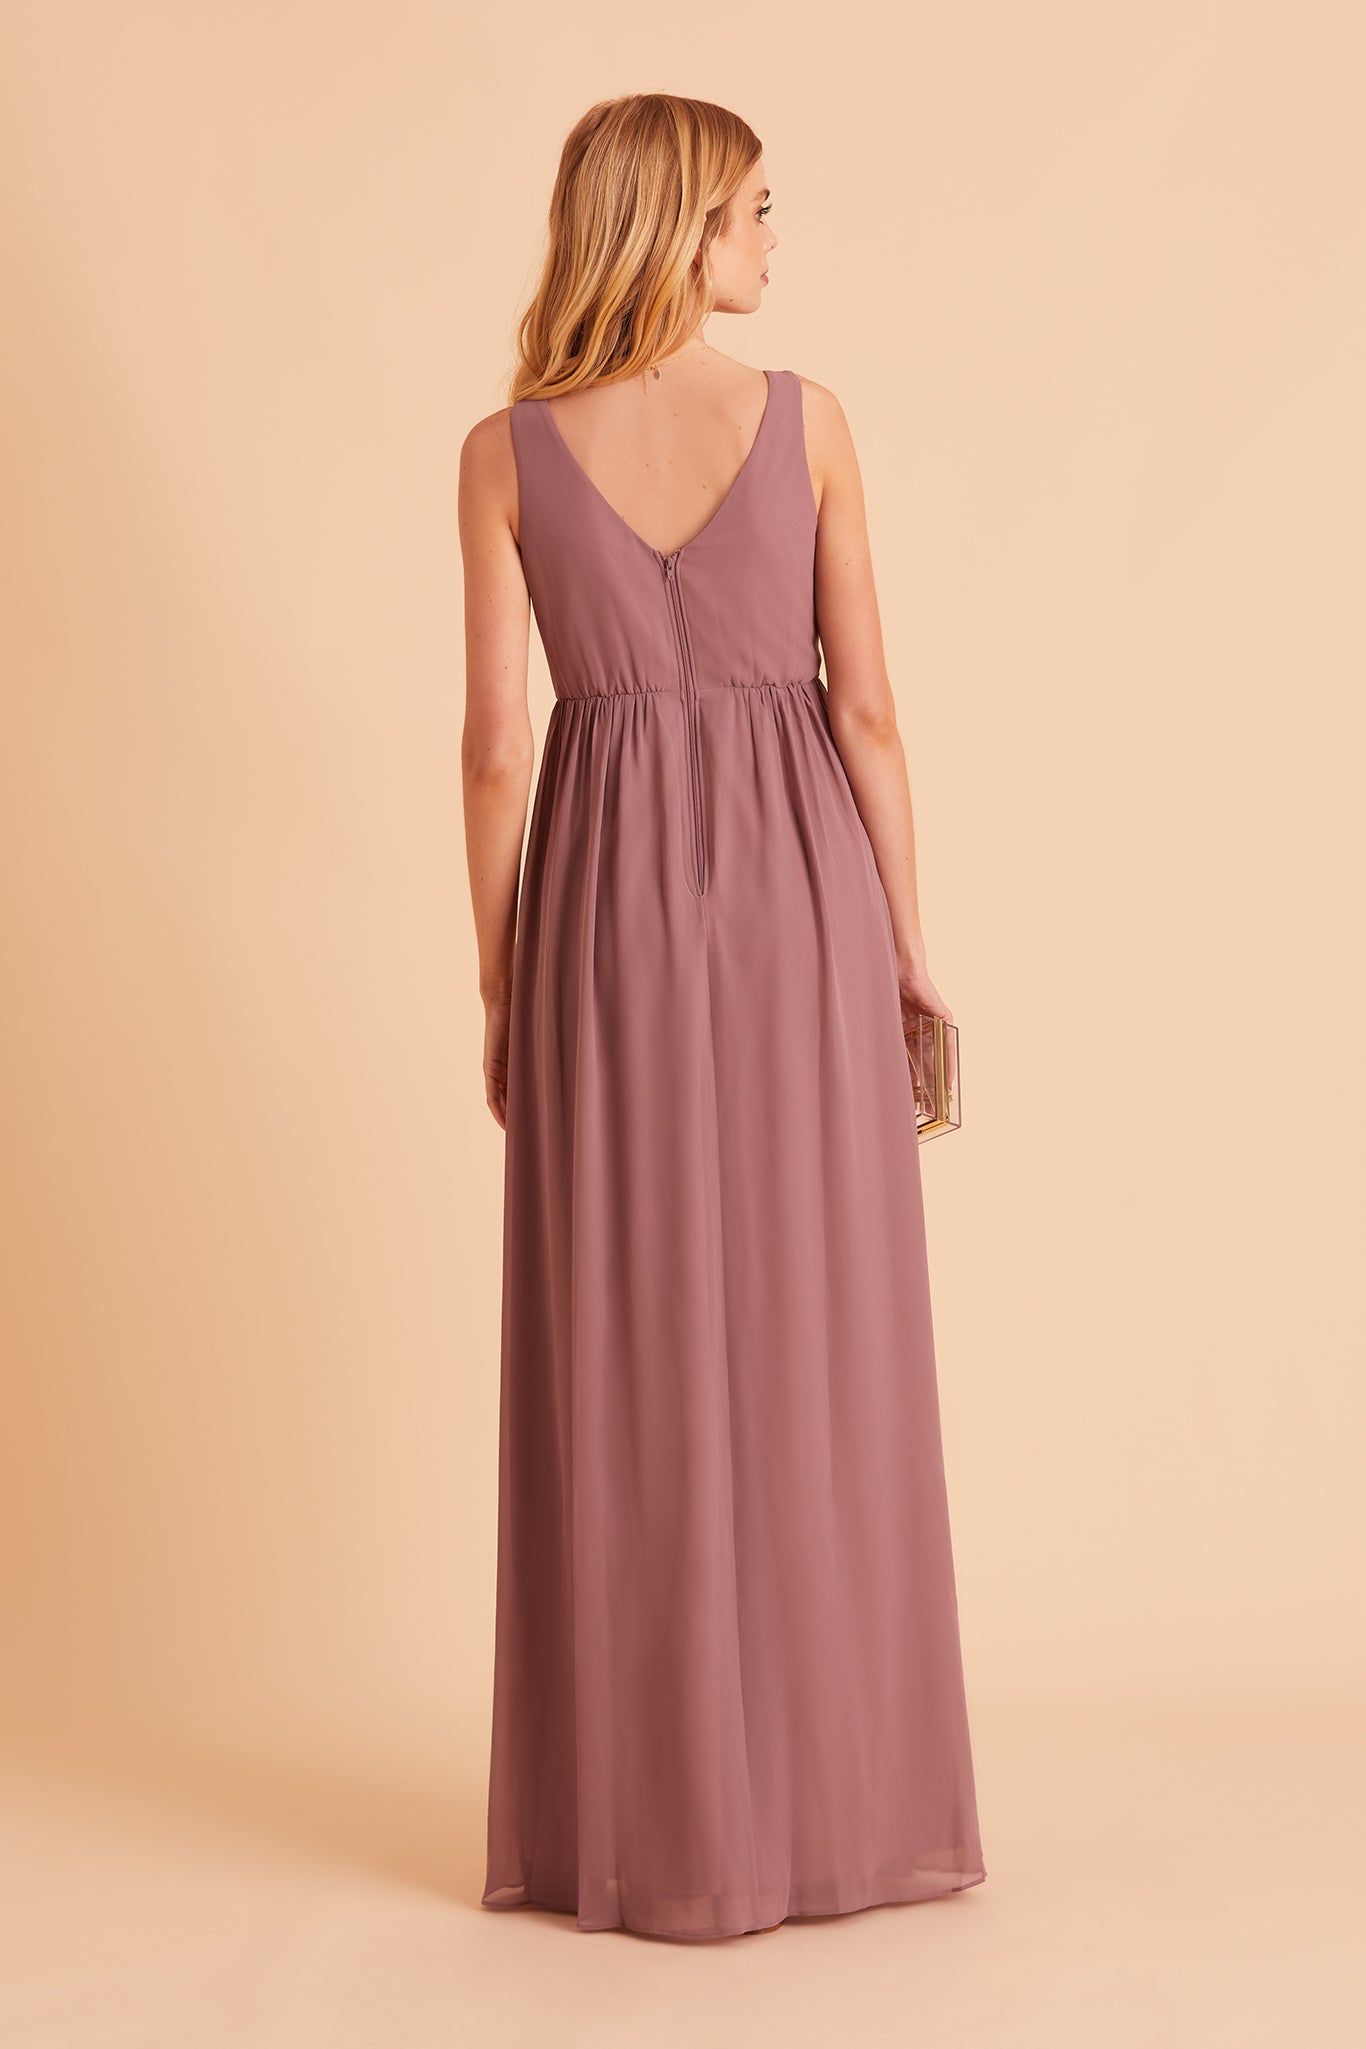 Laurie Empire bridesmaid dress with slit in dark mauve chiffon by Birdy Grey, back view